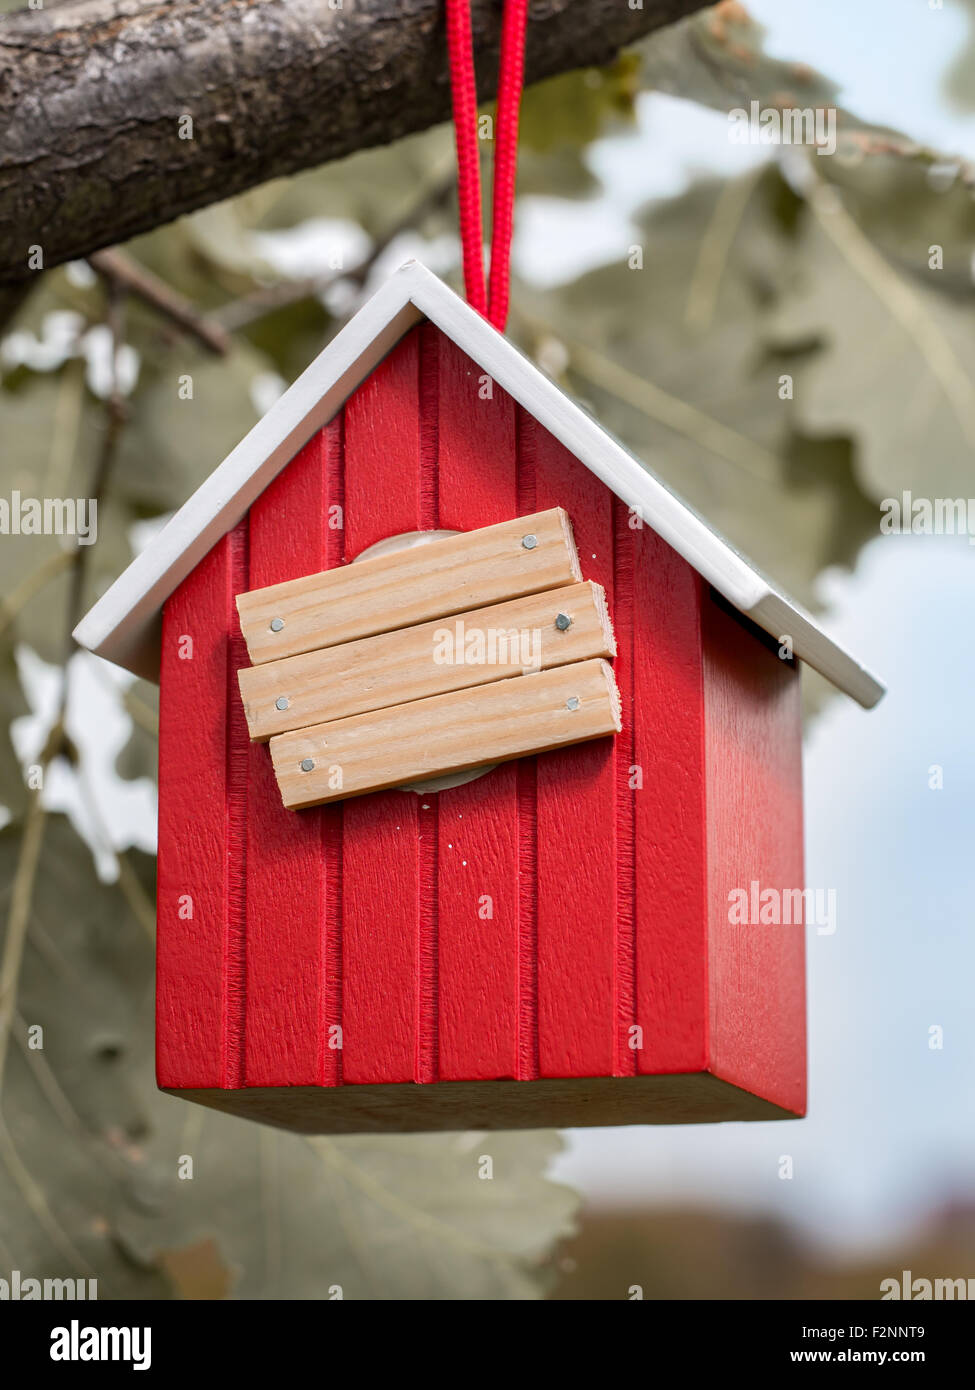 Wooden red birdhouse hanging on tree branch with entry hole covered with planks Stock Photo